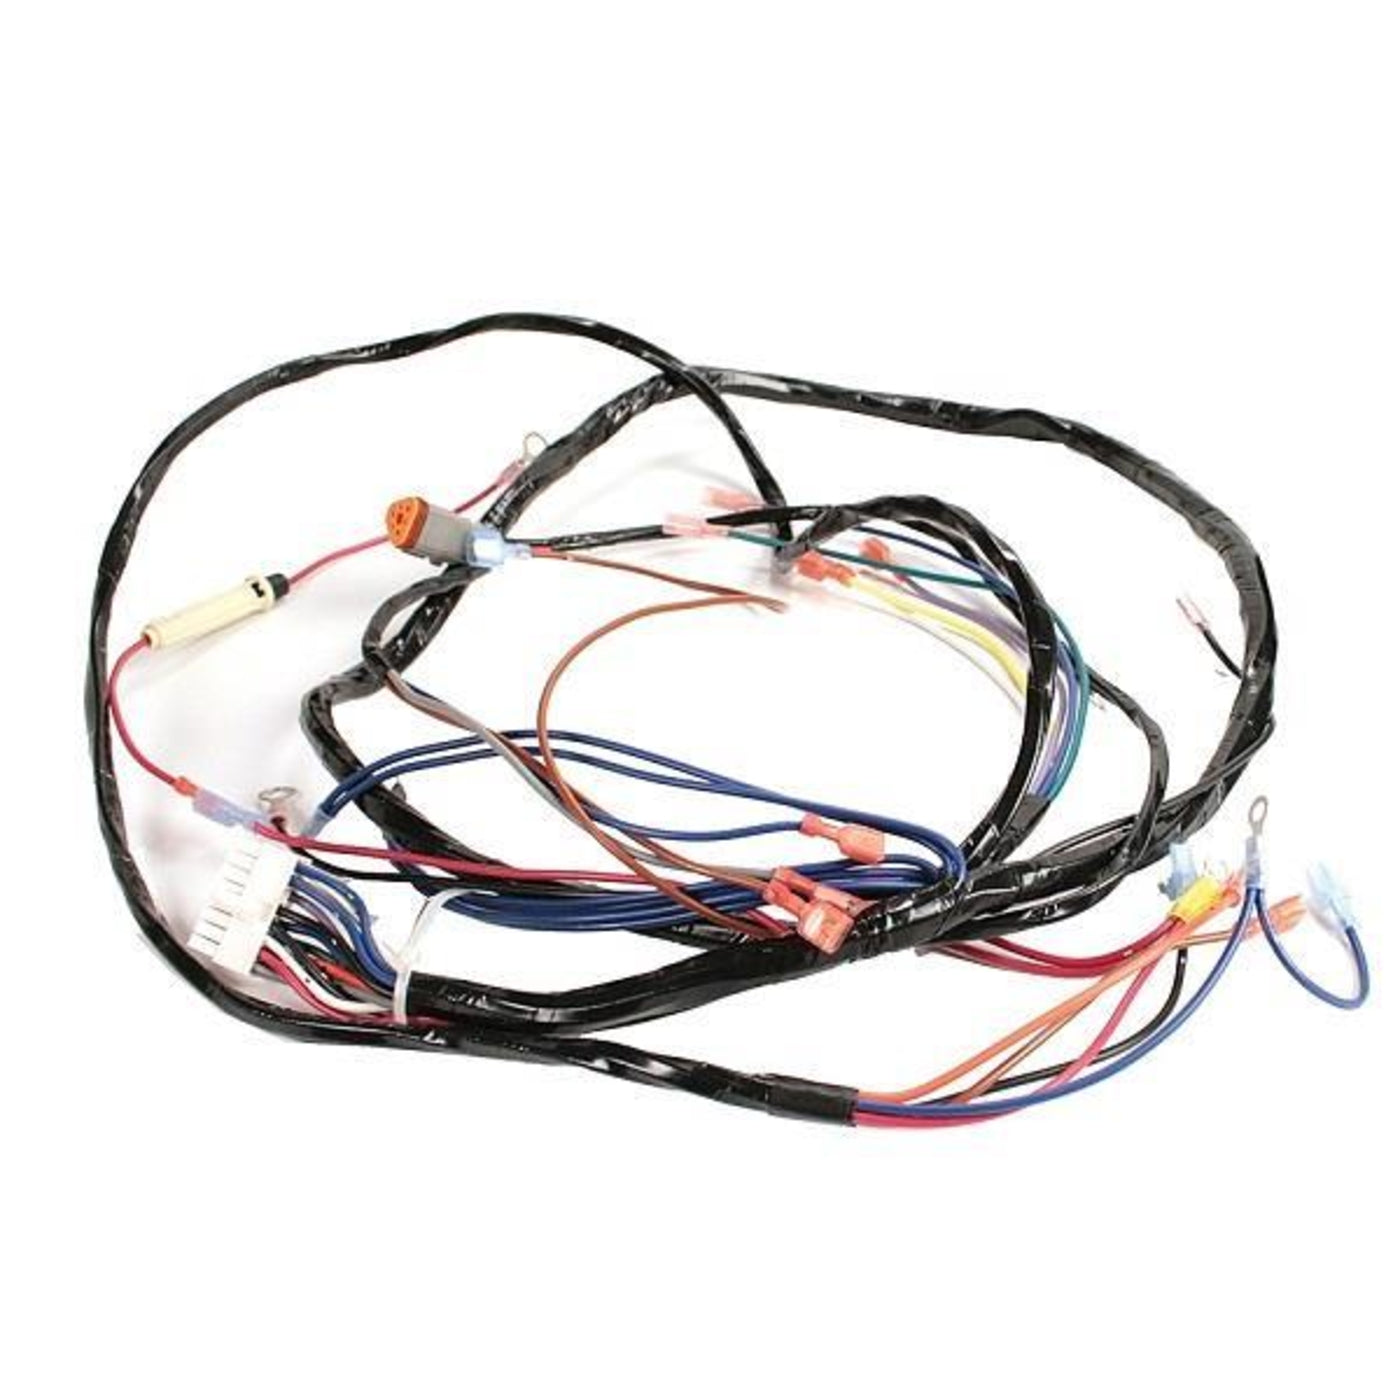 Club Car IQ Wiring Harness 48V the recomended harness for AC Conversions On 96-2000 Reg to IQ Controller Conversion